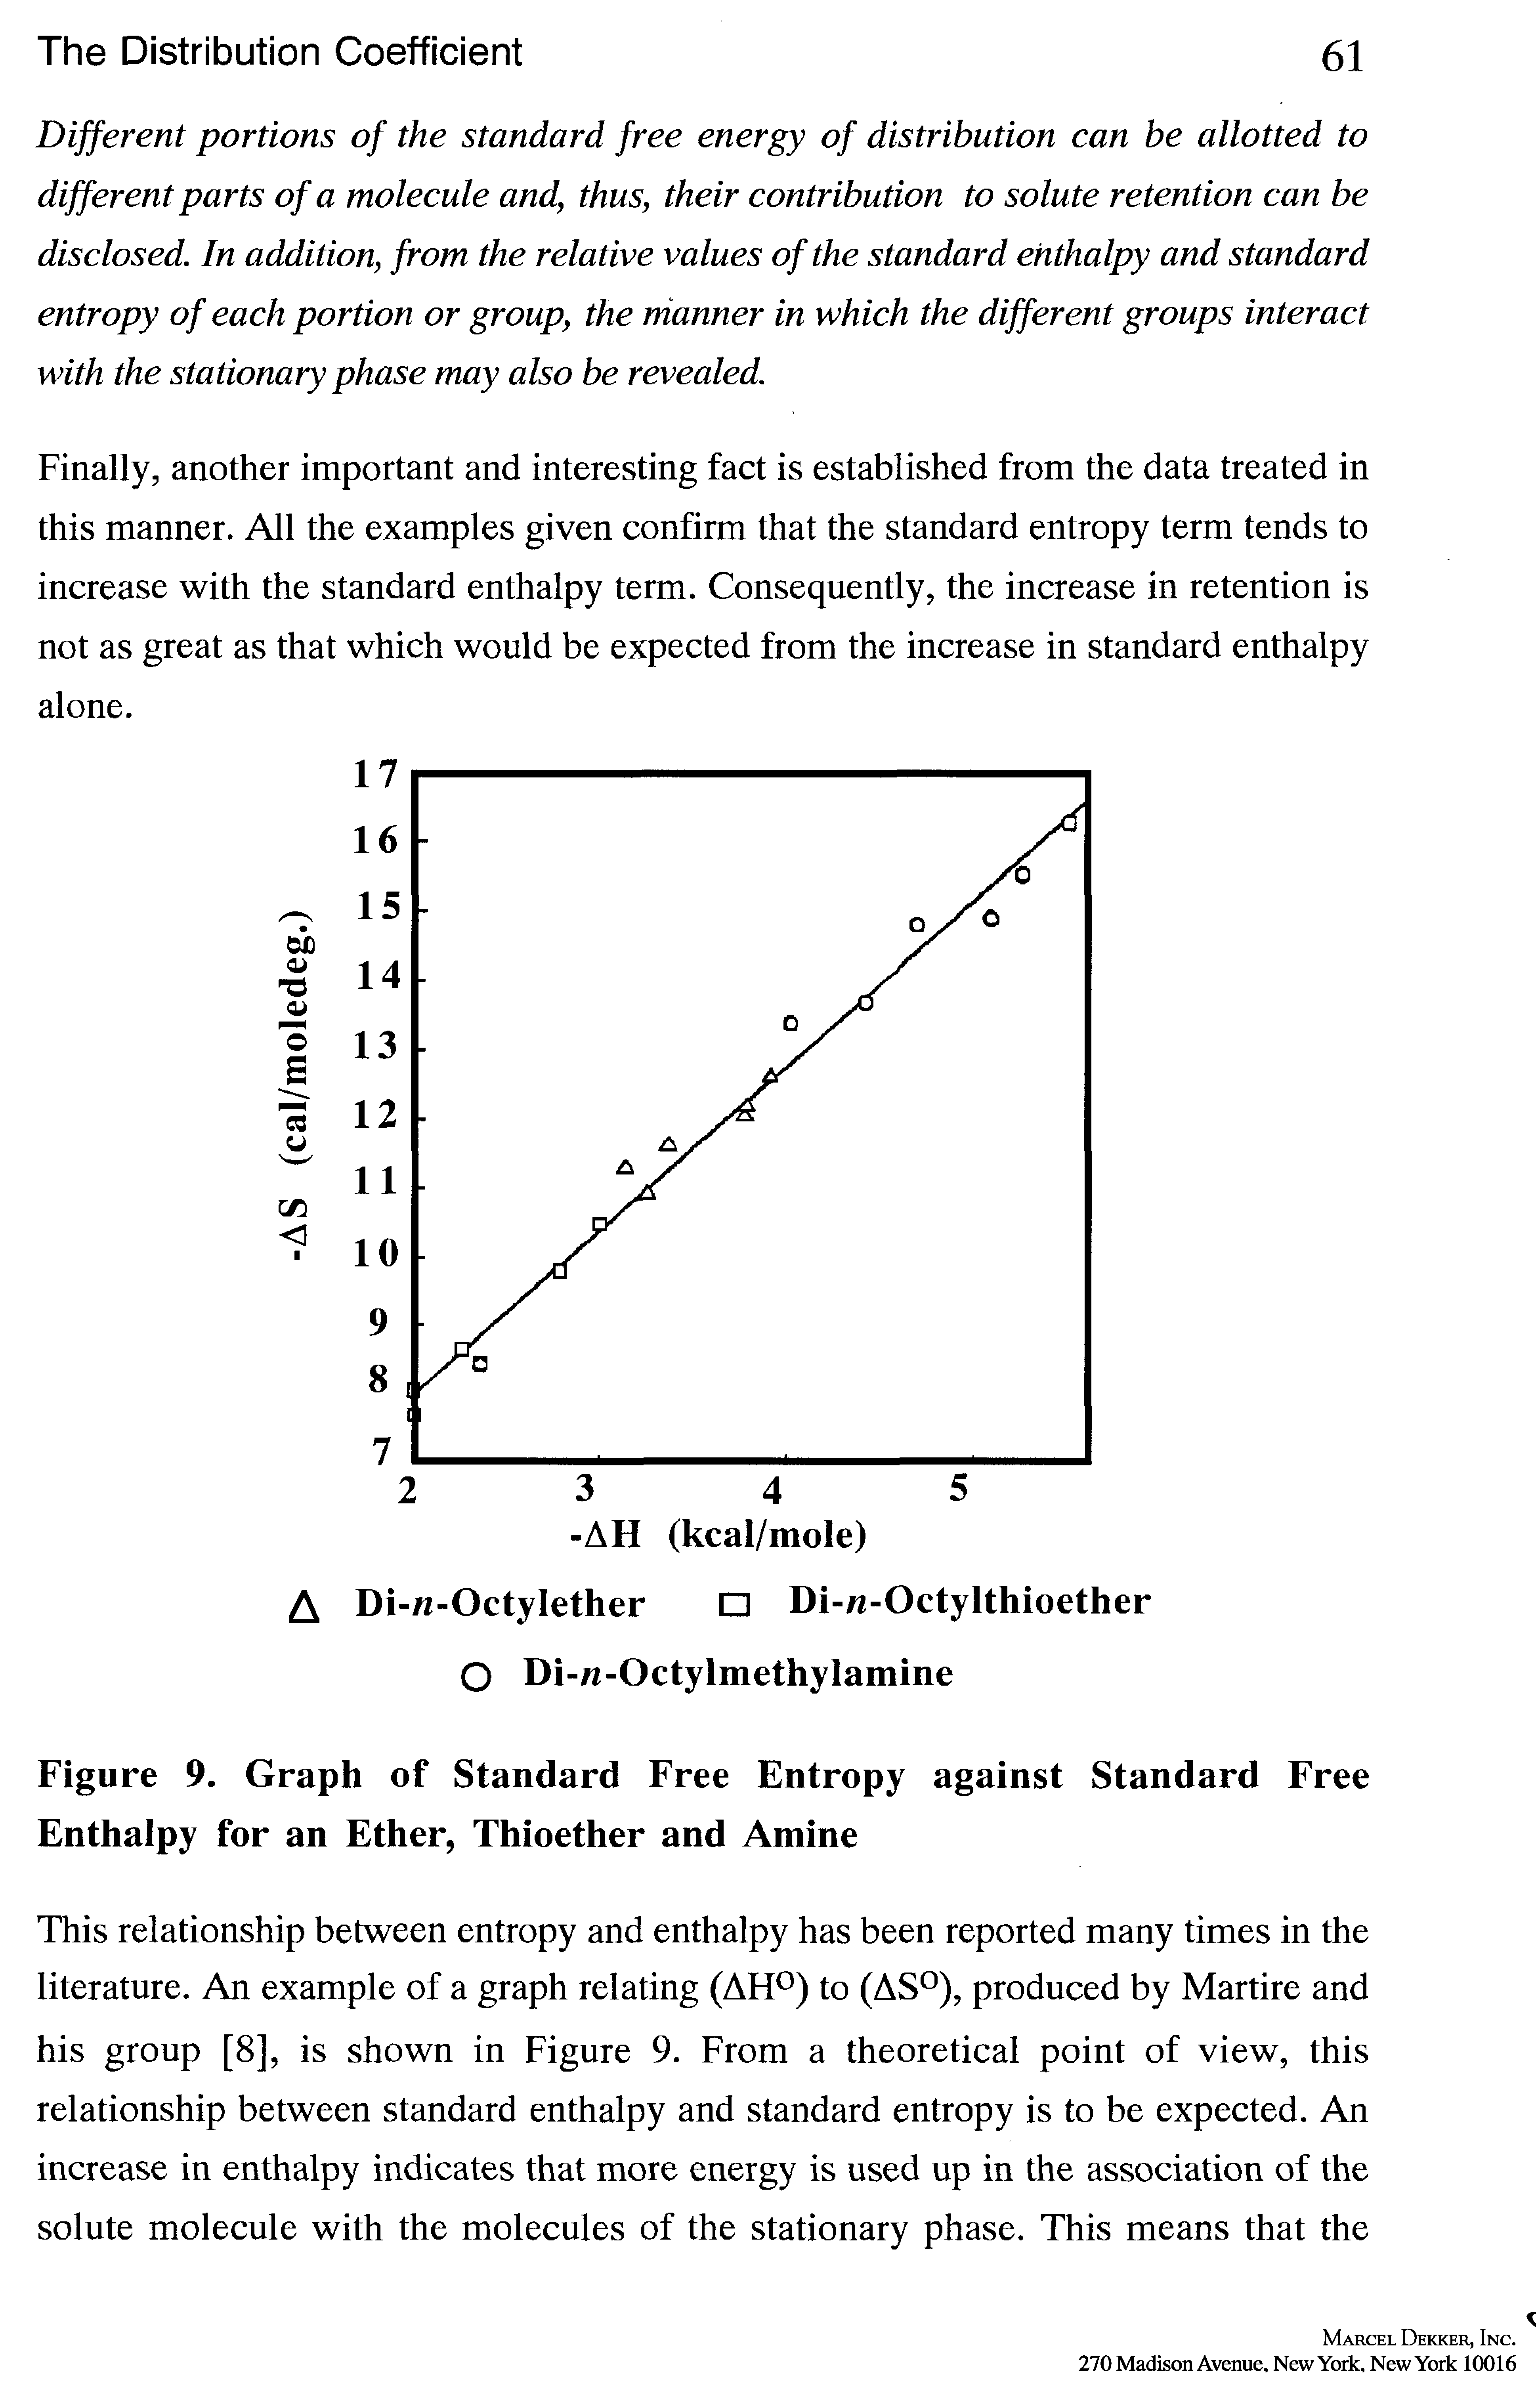 Figure 9. Graph of Standard Free Entropy against Standard Free Enthalpy for an Ether, Thioether and Amine...